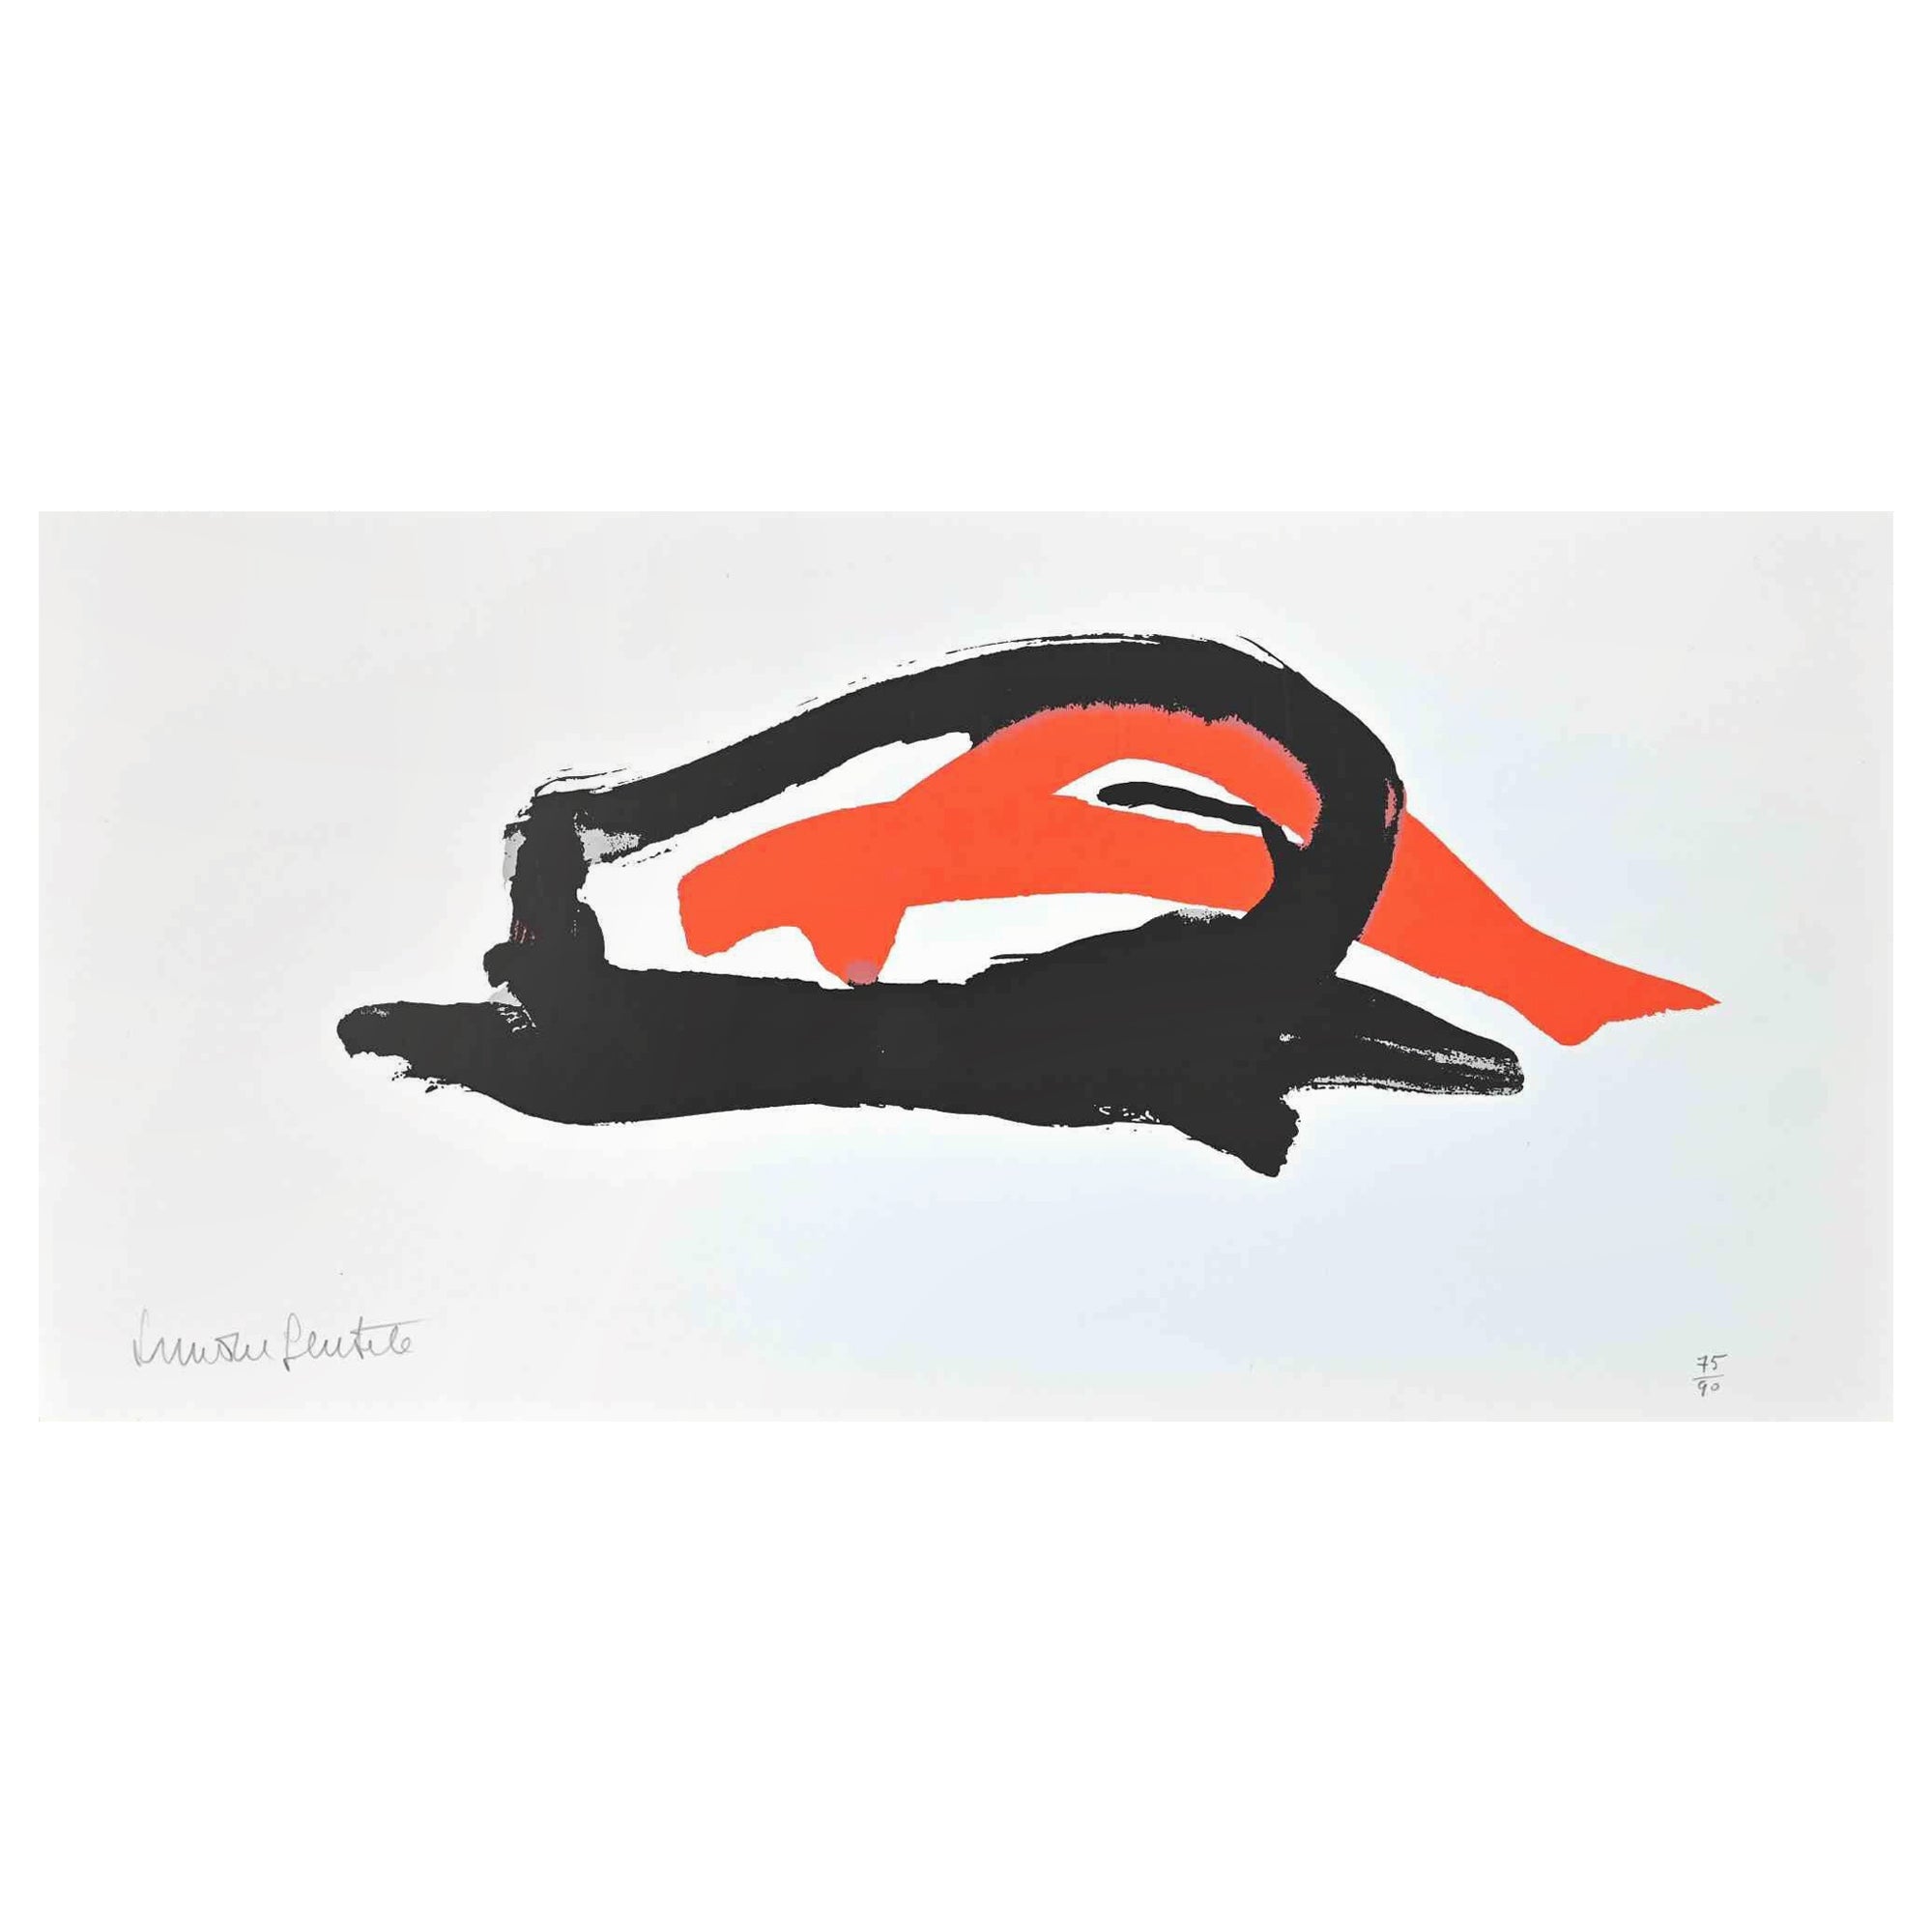 Abstract Composition is an original Lithograph realized by Simone Gentile in the 1980s.

Hand-signed.

Numbered. Edition, 75/90.

The artwork is depicted through confident strokes in a well-balanced composition.